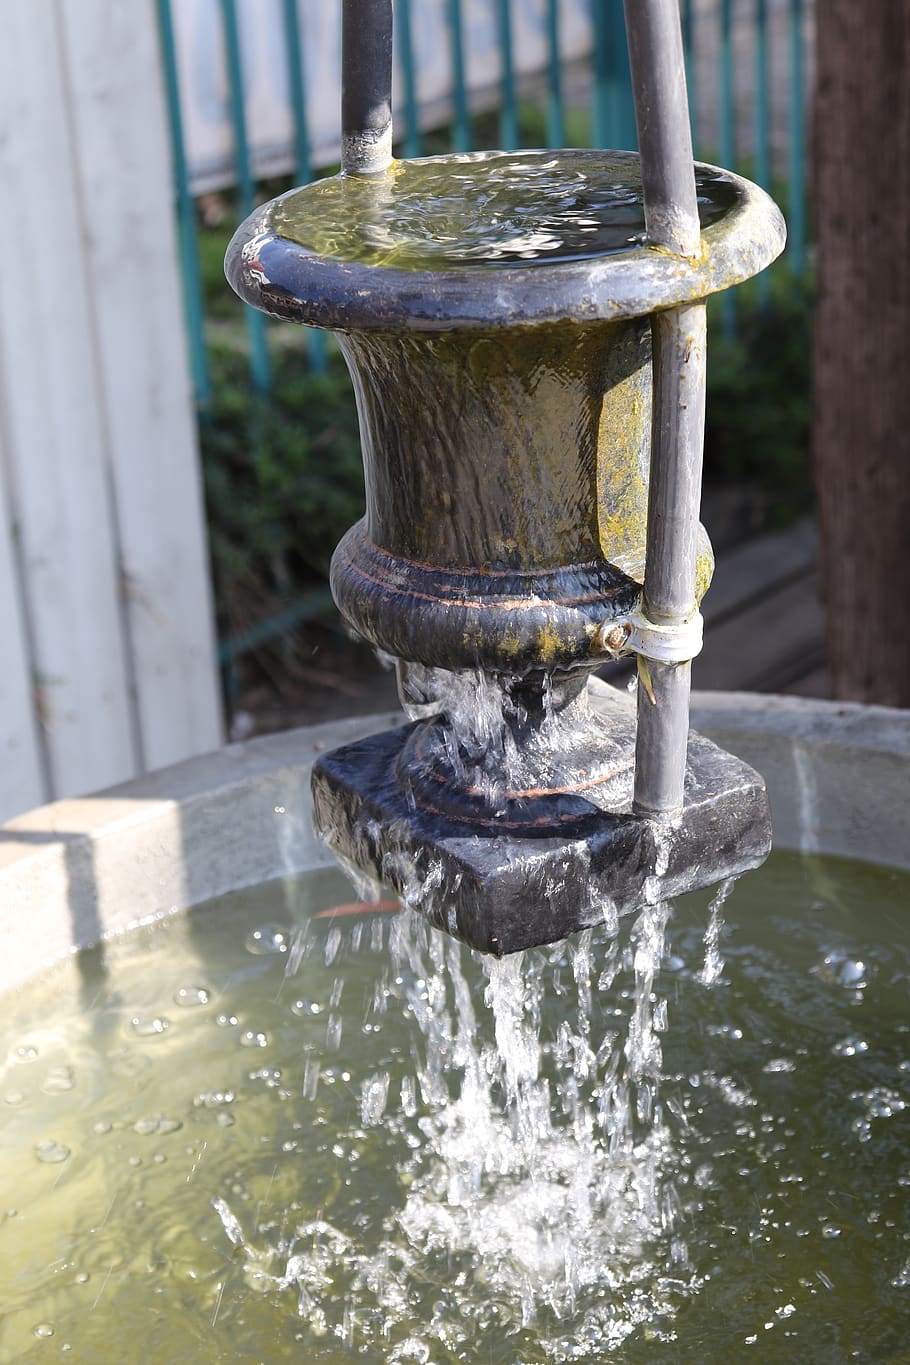 h2o, wet, water, fountain, liquid, well, metal, day, flowing water, nature